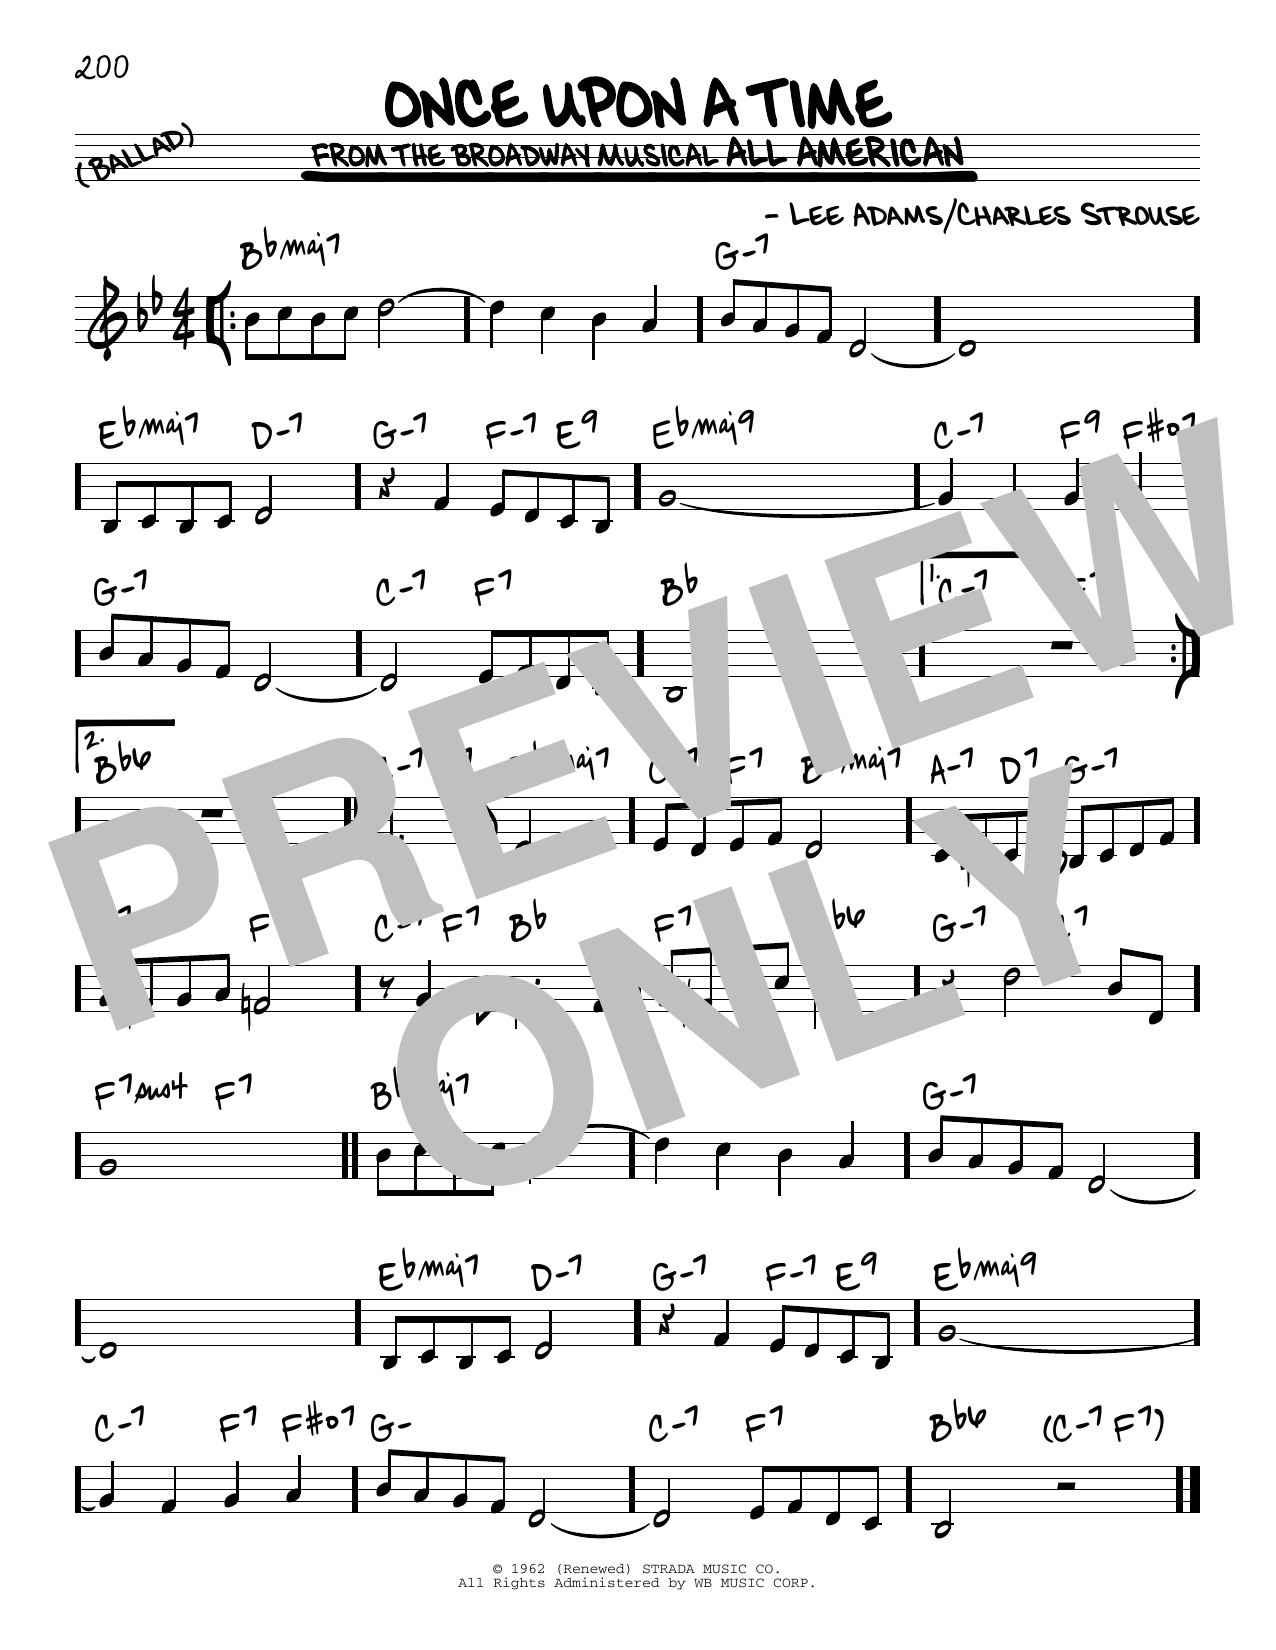 Download Charles Strouse Once Upon A Time Sheet Music